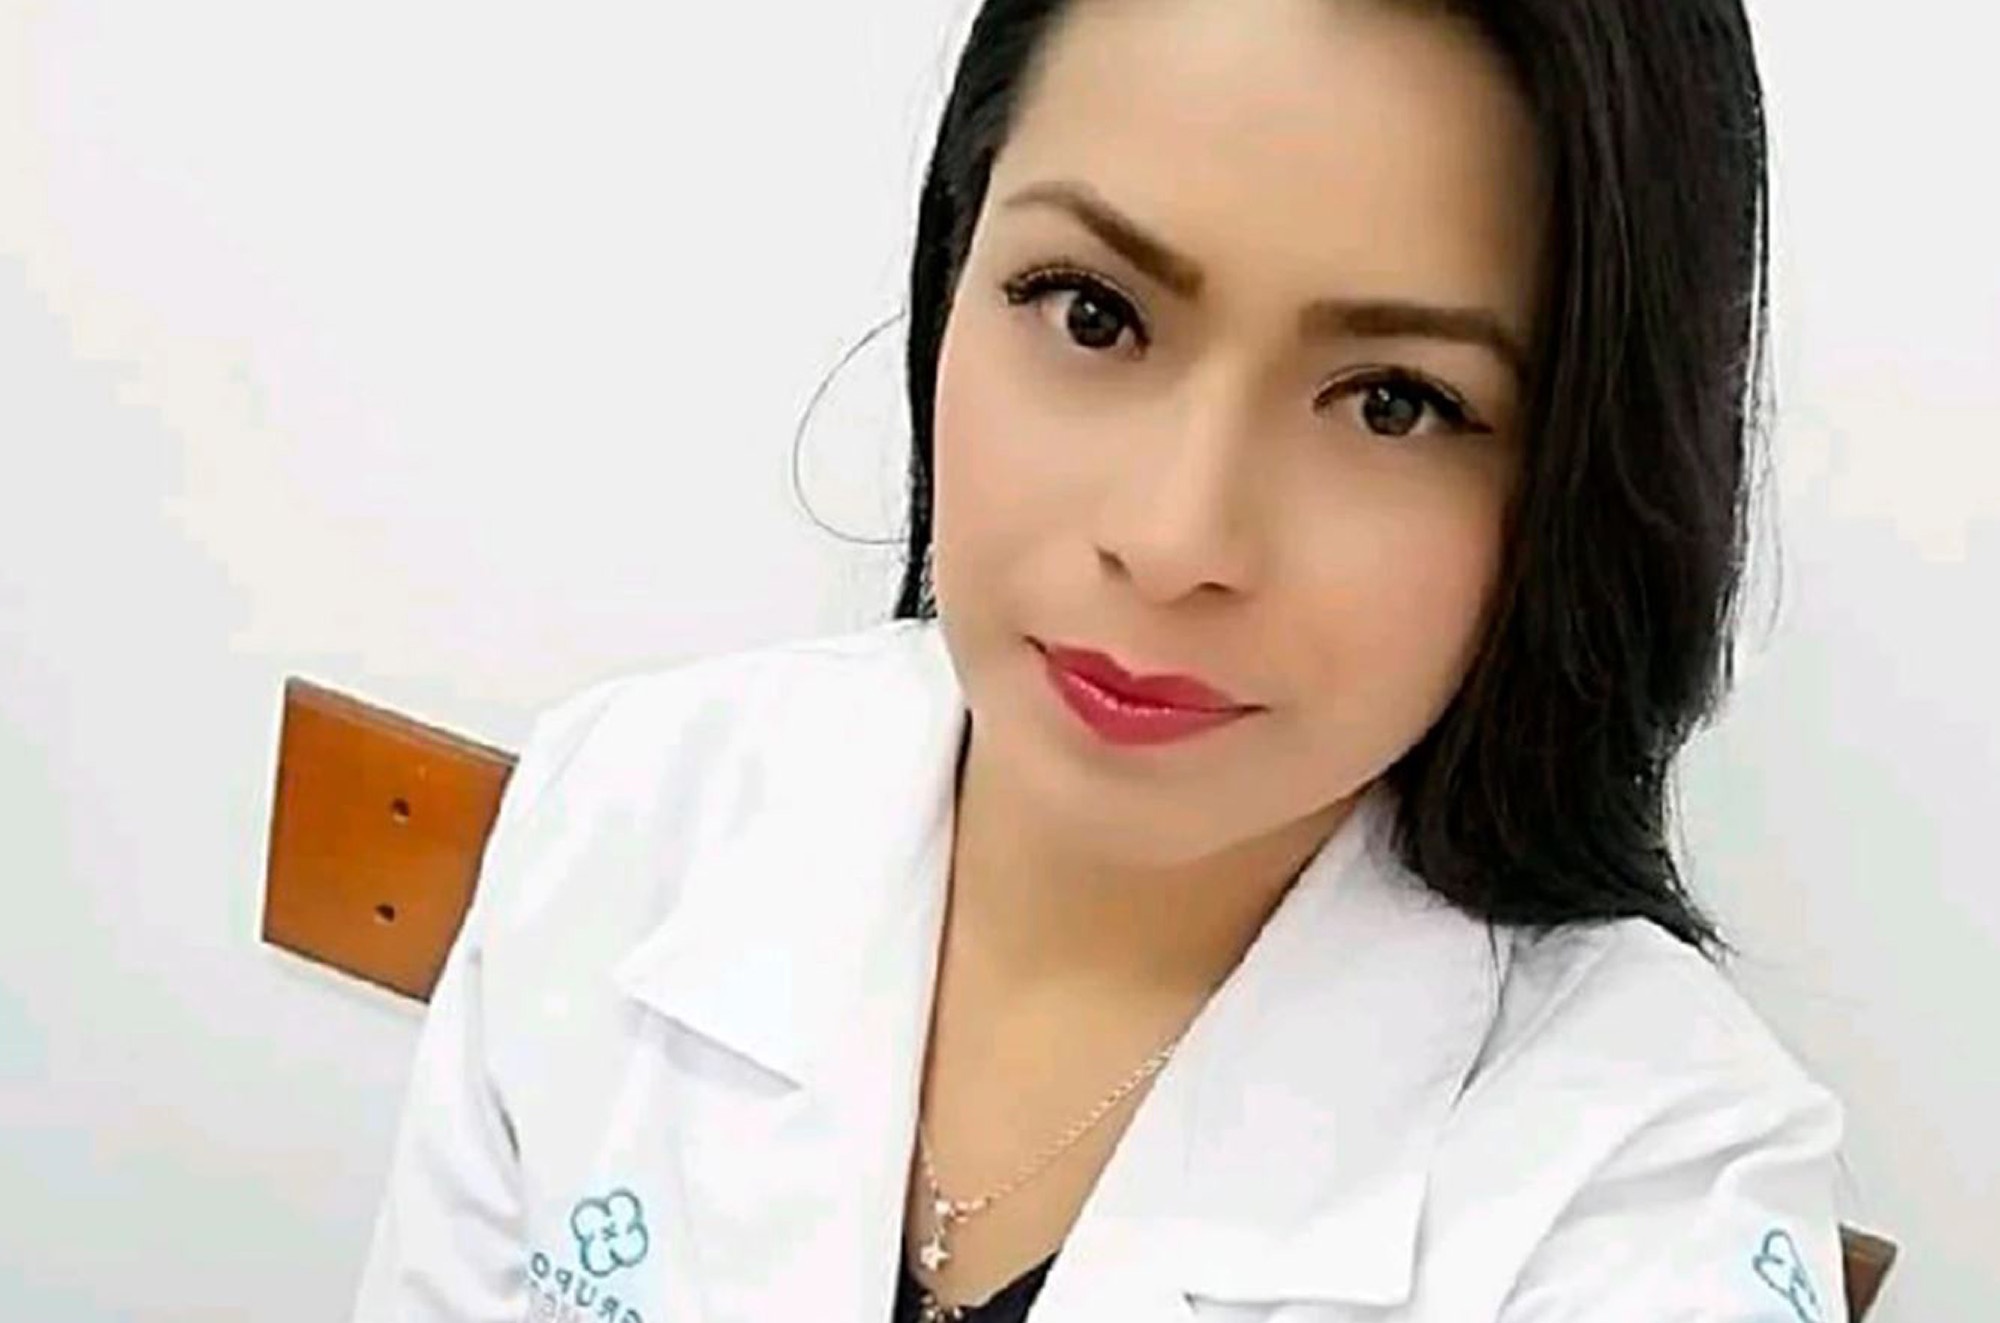 Read more about the article Arrests After Pretty Doctor, 29, Dies In Police Custody Following Car Accident With No Injuries